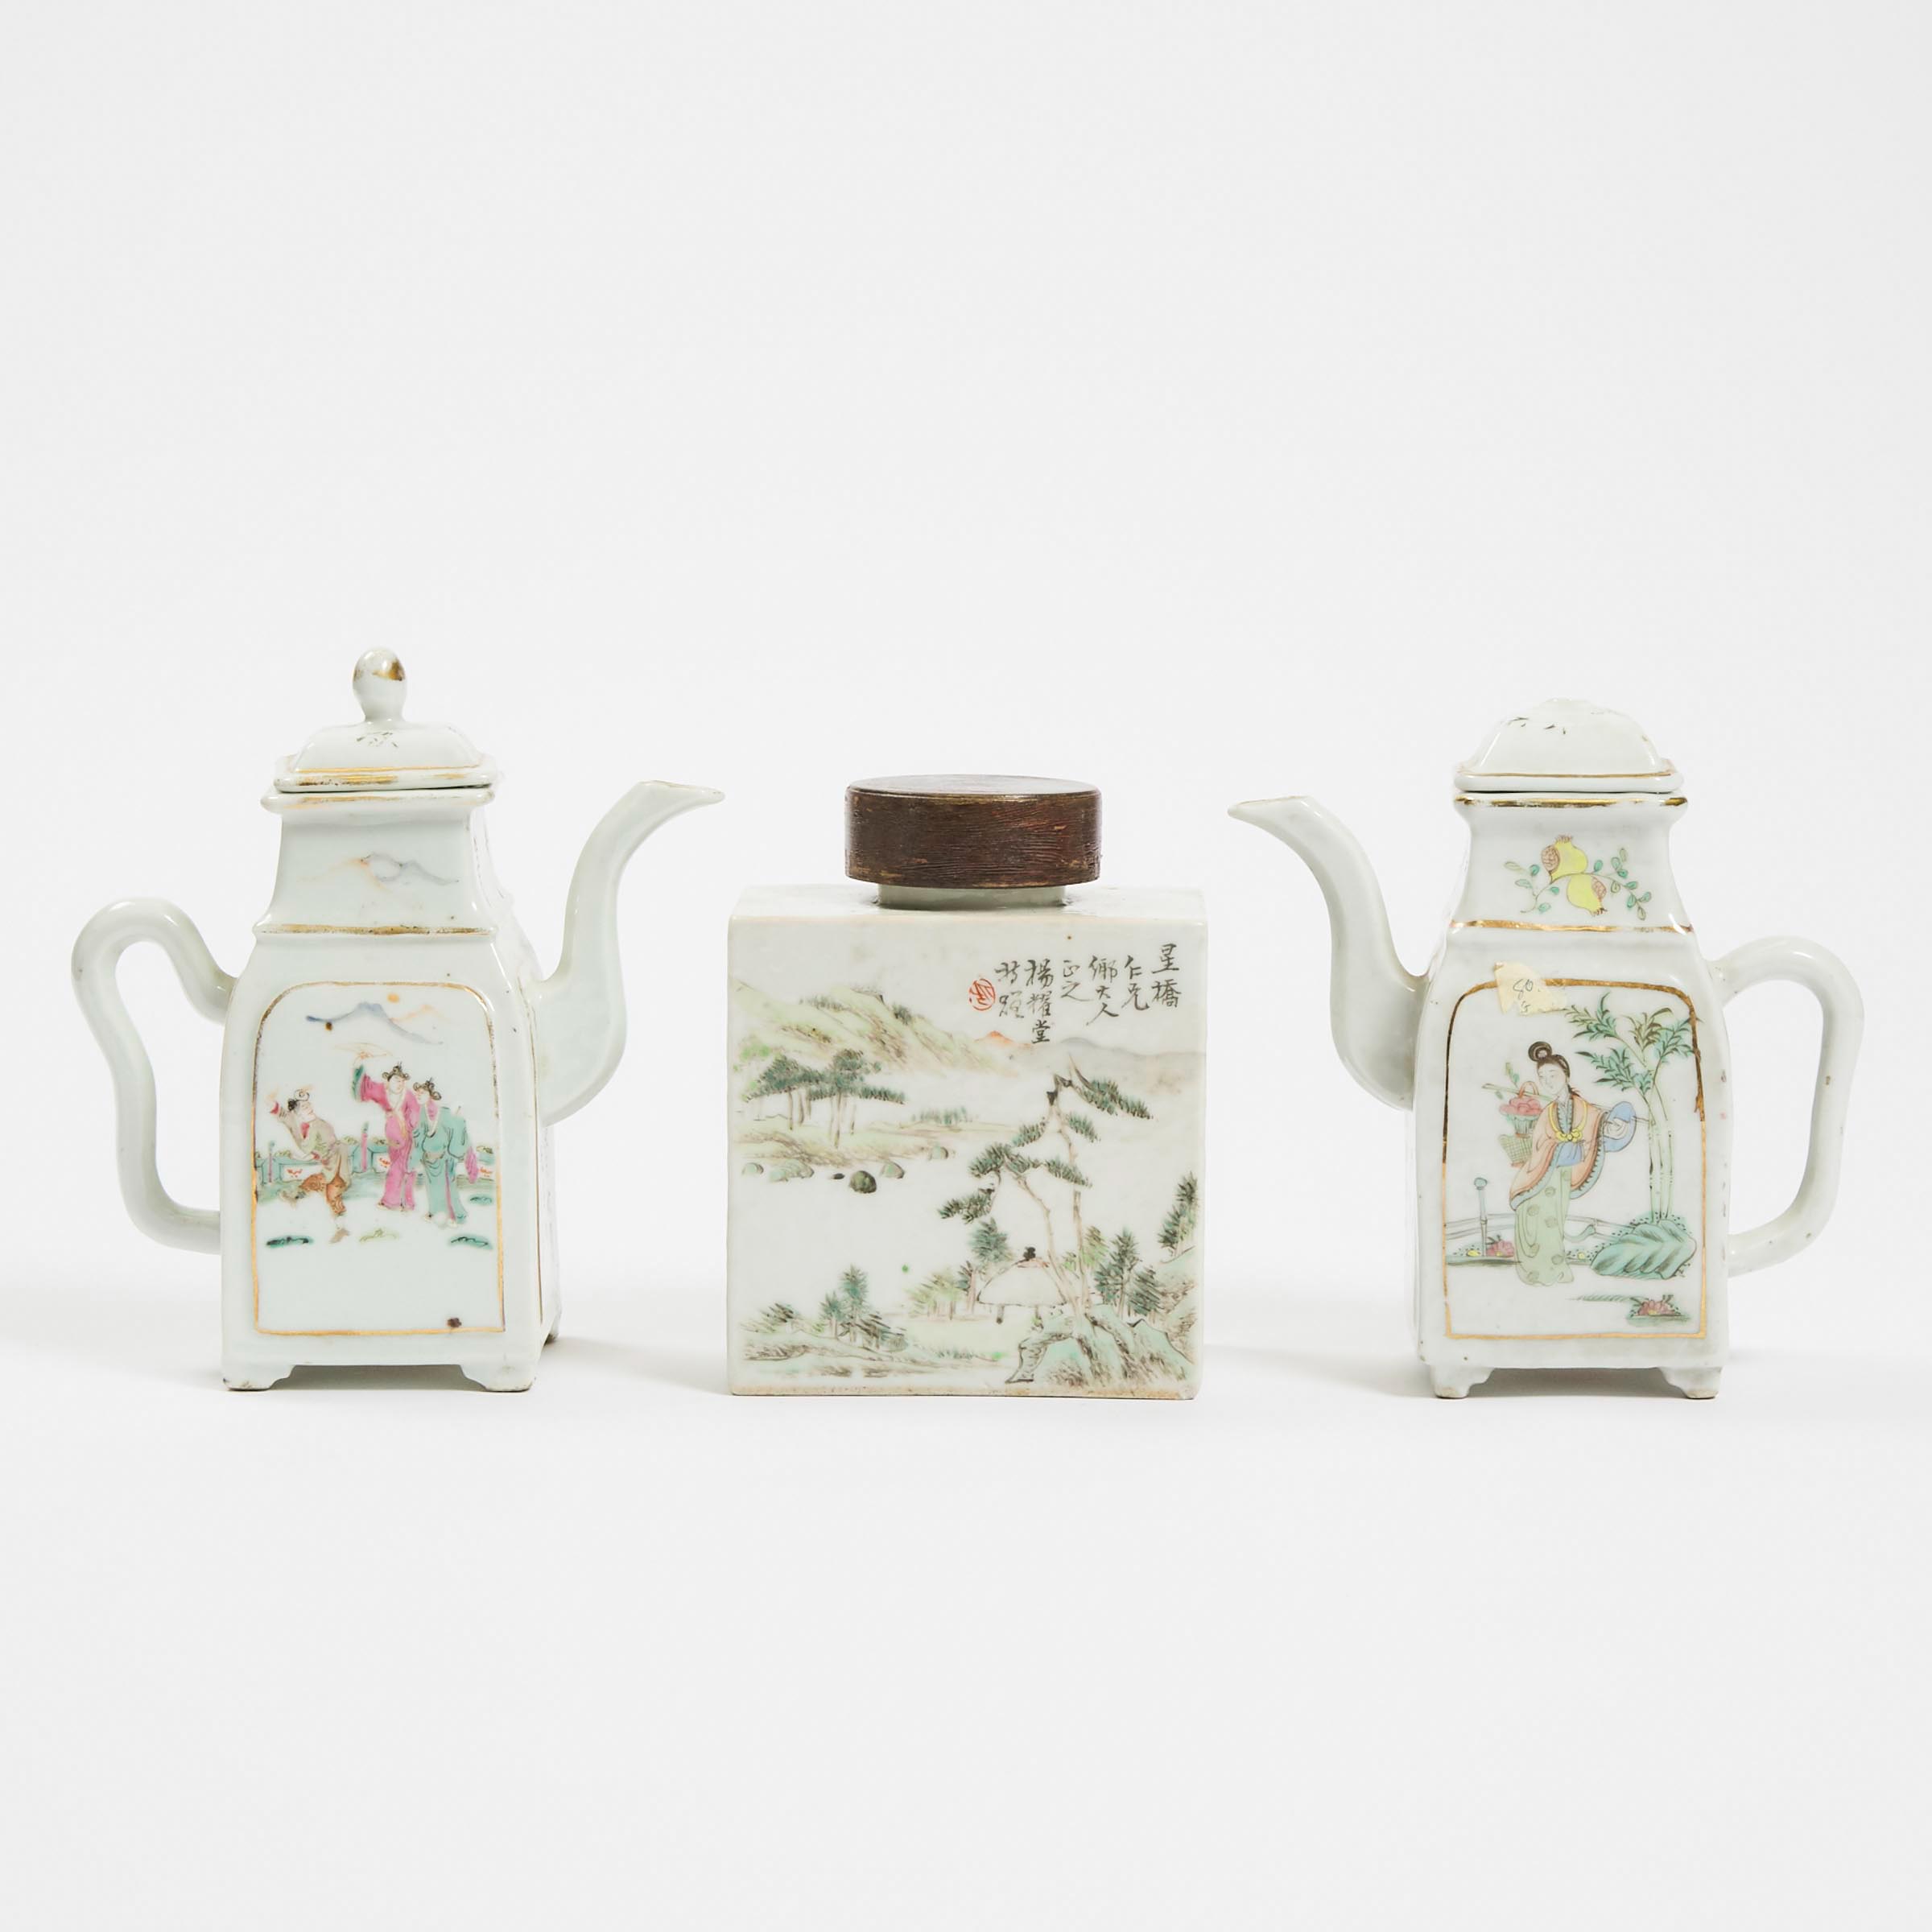 A Pair of Famille Rose Square-Form Teapots,